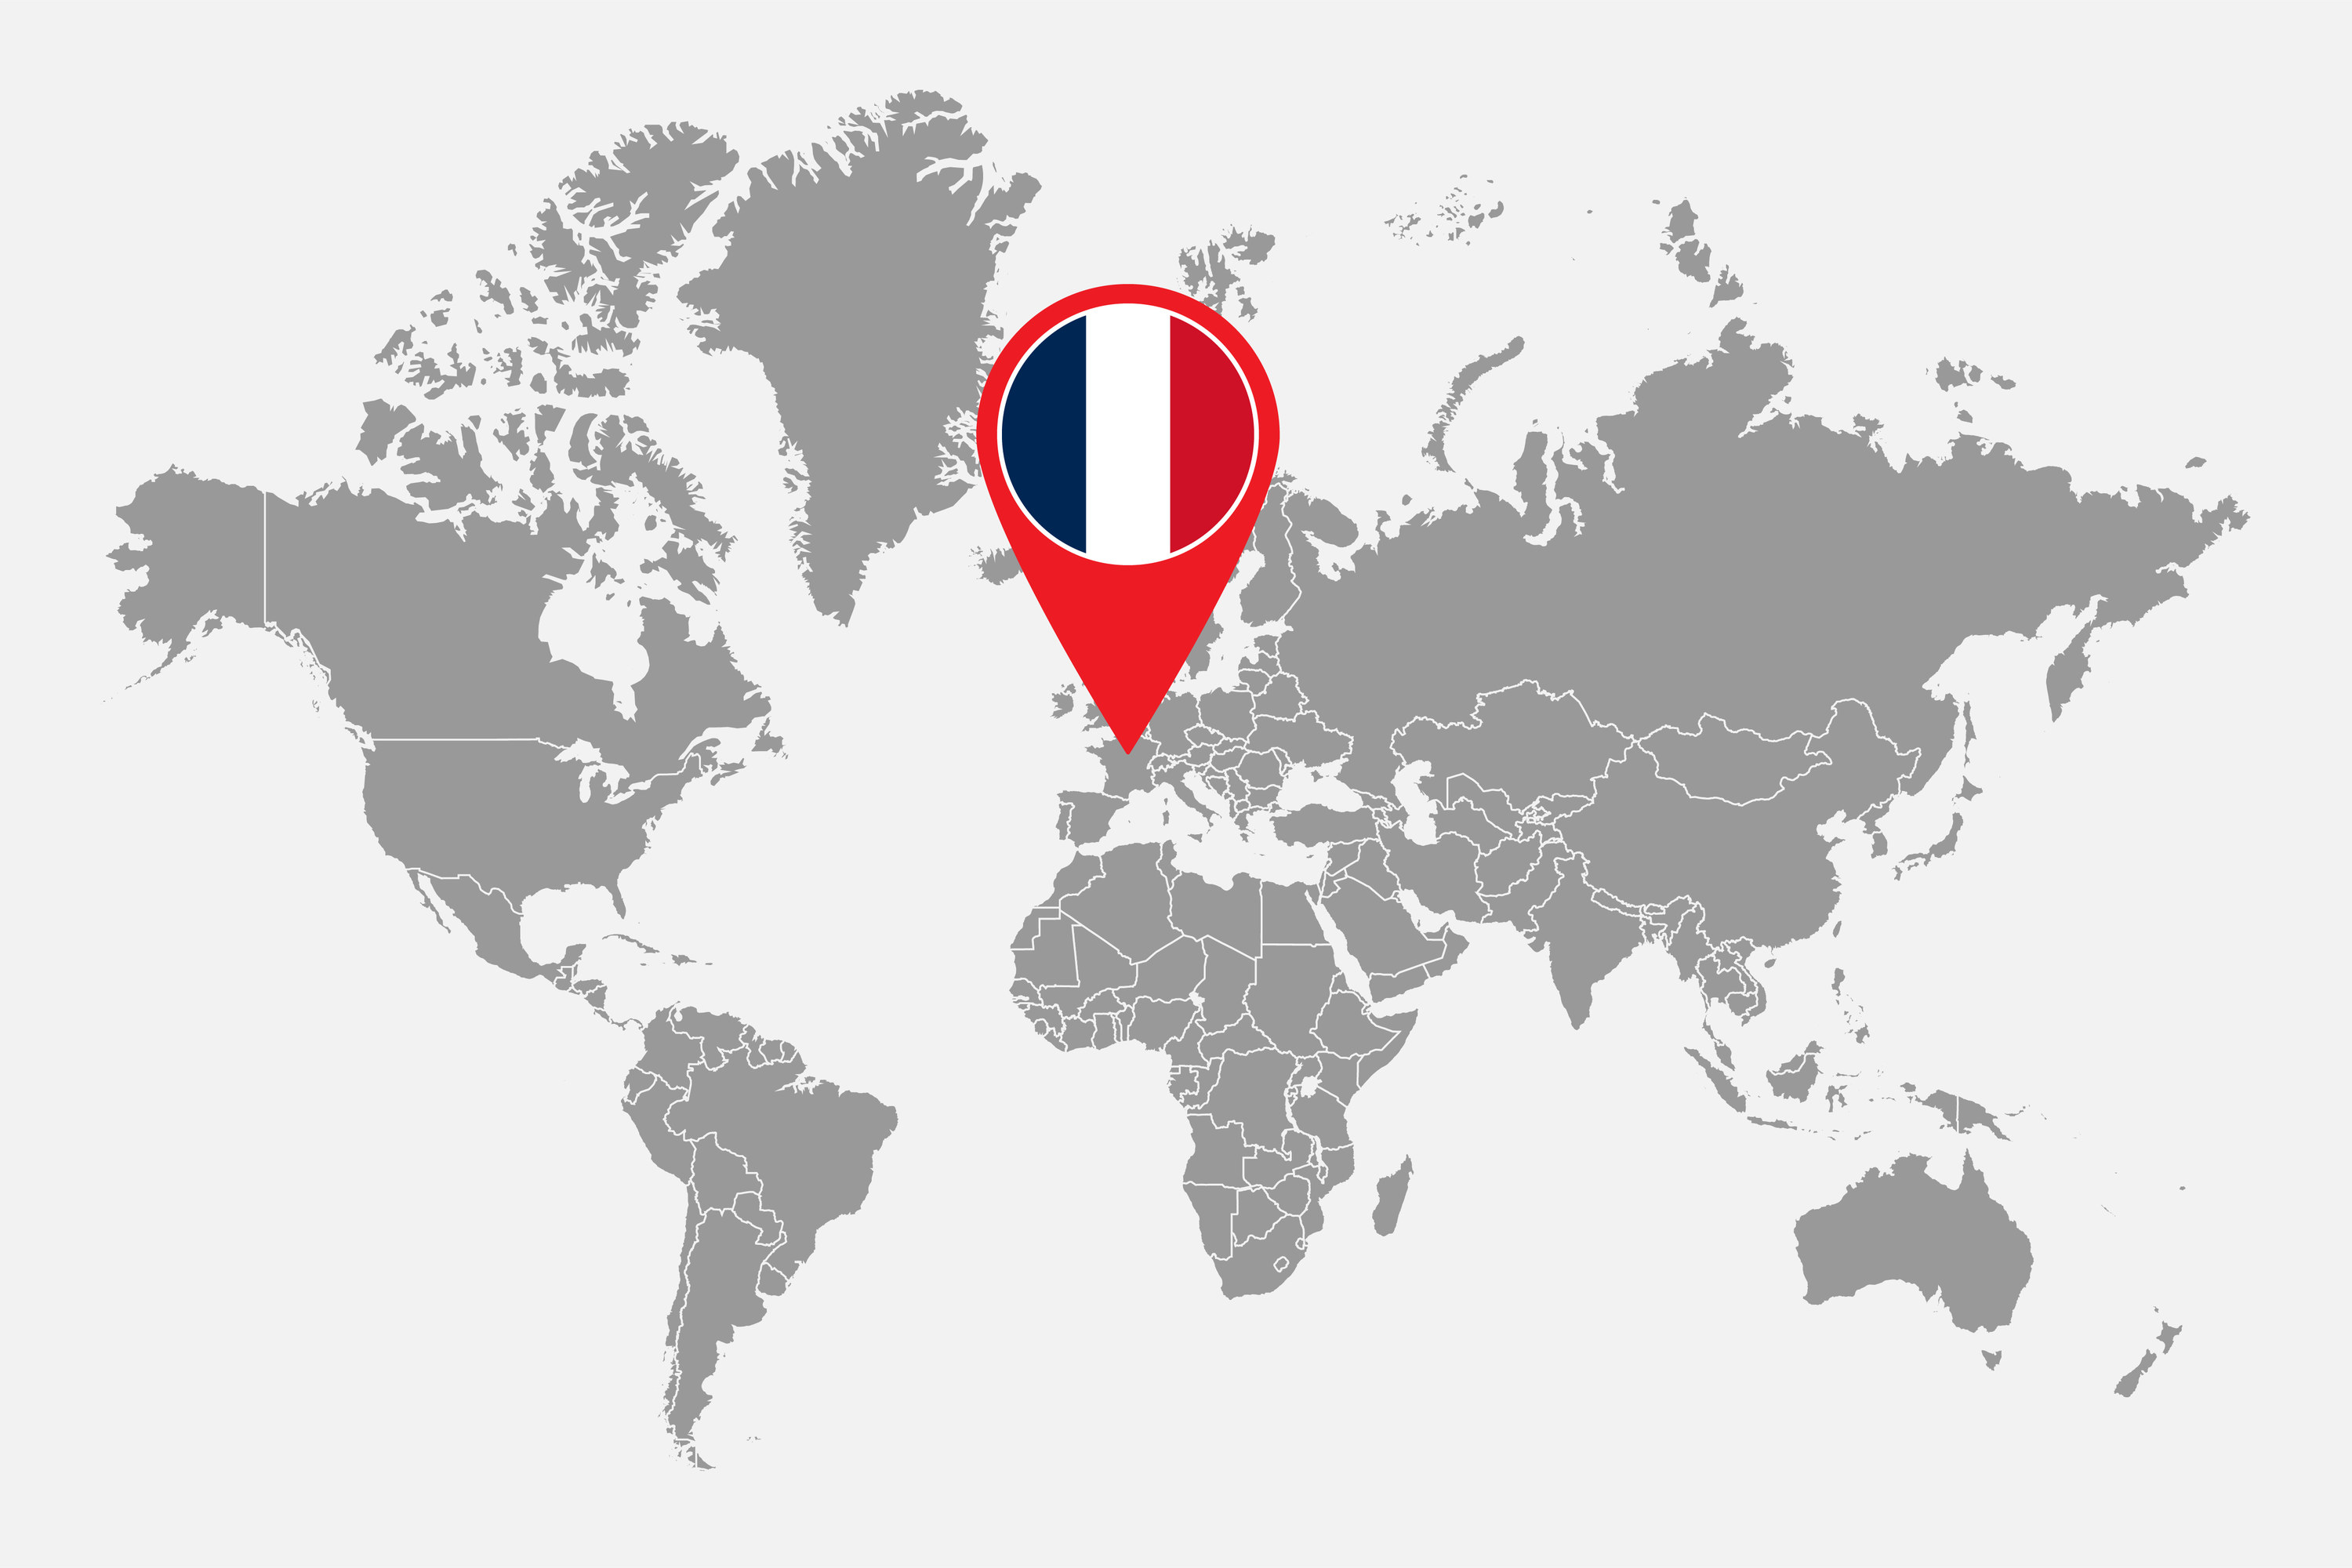 A world map with France indicated